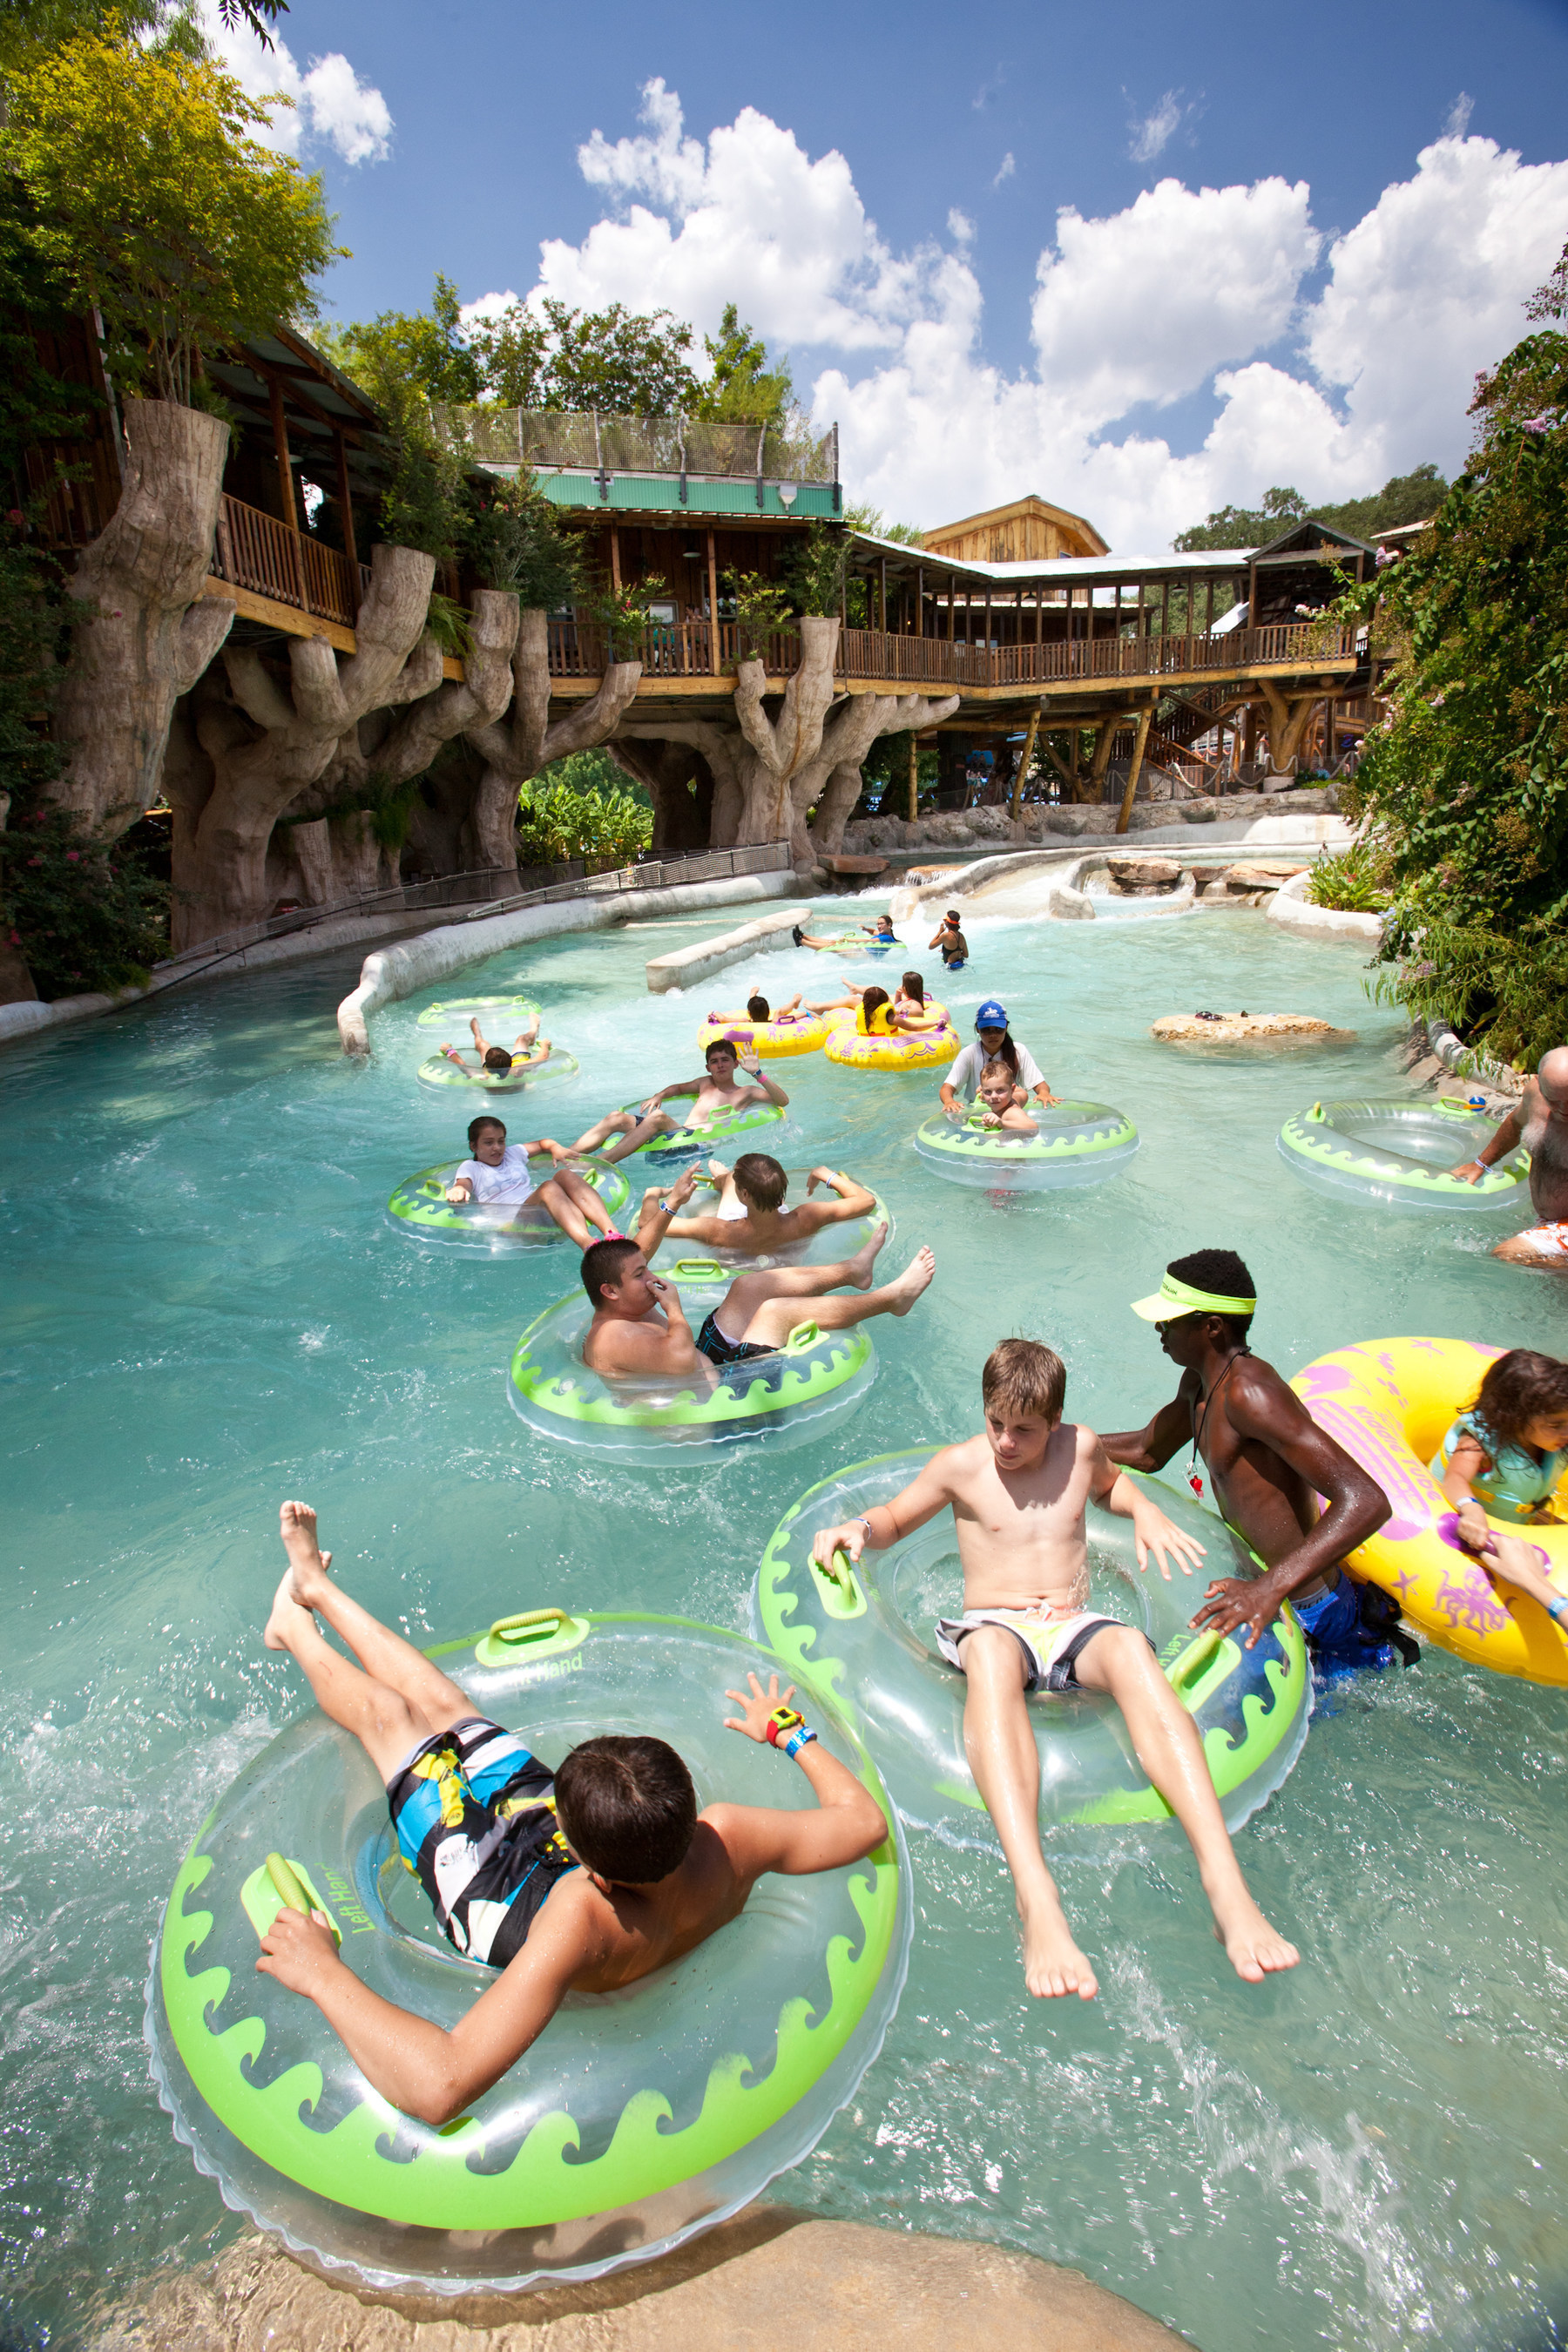 Schlitterbahn is more than seventy acres of shared family fun, thrilling adventure, and relaxation! Nestled along the banks of the Comal River it features world-famous attractions, epic river adventures, kid's water playgrounds, and beautiful spots to relax and share a picnic. You can even stay the night at The Resort at Schlitterbahn at a River Bend Cabin, Treehaus Suite, Schlitterstein Studio Loft, vacation home or hotel room just steps away from all the fun. And, it's right there in downtown New Braunfels.